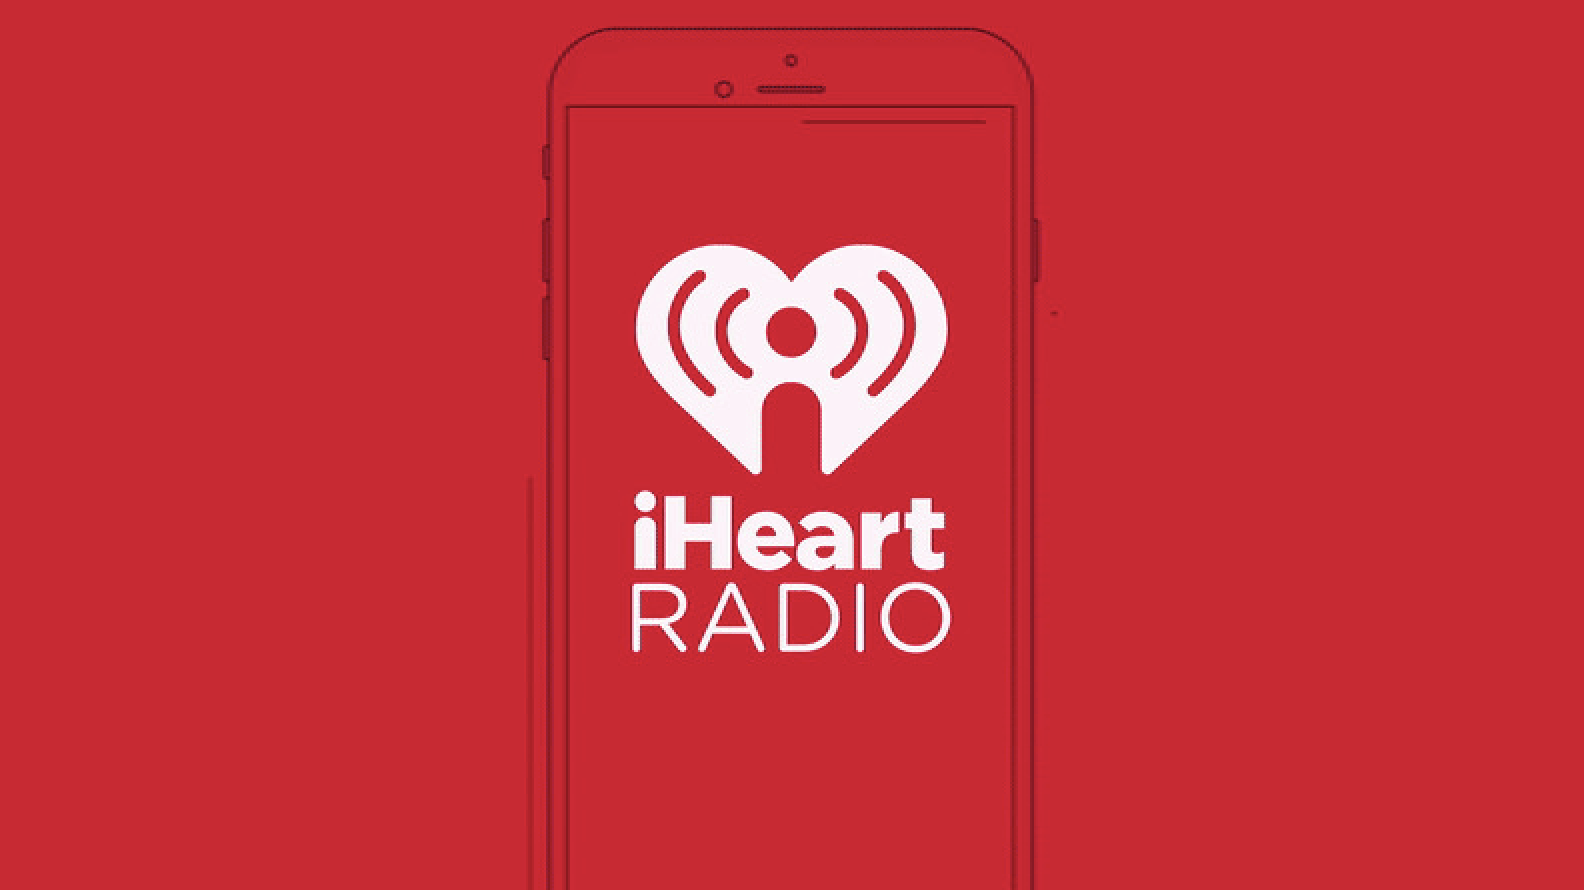 Iheartradio.com Logo - iHeartRadio opens up its playlists to all users with launch of ...